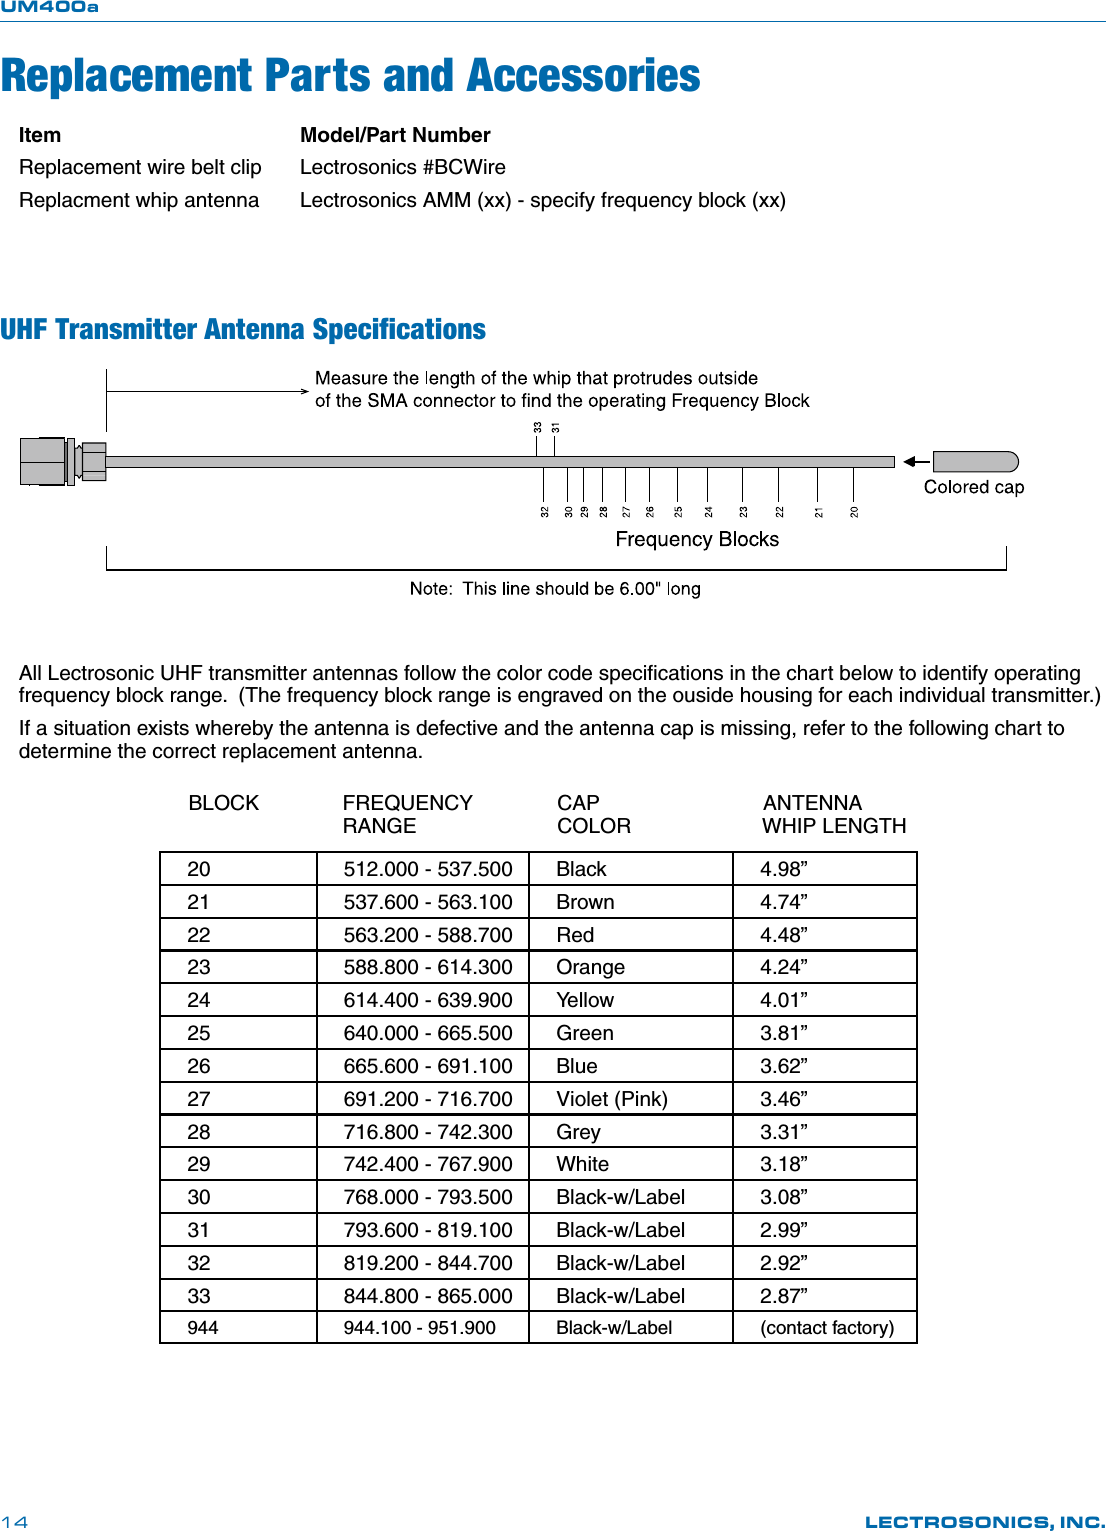 UM400aLECTROSONICS, INC.14ItemReplacement wire belt clipReplacment whip antennaReplacement Parts and AccessoriesUHF Transmitter Antenna SpeciﬁcationsAll Lectrosonic UHF transmitter antennas follow the color code speciﬁcations in the chart below to identify operating frequency block range.  (The frequency block range is engraved on the ouside housing for each individual transmitter.)If a situation exists whereby the antenna is defective and the antenna cap is missing, refer to the following chart to determine the correct replacement antenna.    BLOCK  FREQUENCY  CAP   ANTENNA     RANGE  COLOR   WHIP LENGTH20 512.000 - 537.500 Black 4.98”21 537.600 - 563.100 Brown 4.74”22 563.200 - 588.700 Red 4.48”23 588.800 - 614.300 Orange 4.24”24 614.400 - 639.900 Yellow 4.01”25 640.000 - 665.500 Green 3.81”26 665.600 - 691.100 Blue 3.62”27 691.200 - 716.700 Violet (Pink) 3.46”28 716.800 - 742.300 Grey 3.31”29 742.400 - 767.900 White 3.18”30 768.000 - 793.500 Black-w/Label 3.08”31 793.600 - 819.100 Black-w/Label 2.99”32 819.200 - 844.700 Black-w/Label 2.92”33 844.800 - 865.000 Black-w/Label 2.87”944 944.100 - 951.900 Black-w/Label (contact factory)Model/Part NumberLectrosonics #BCWireLectrosonics AMM (xx) - specify frequency block (xx)